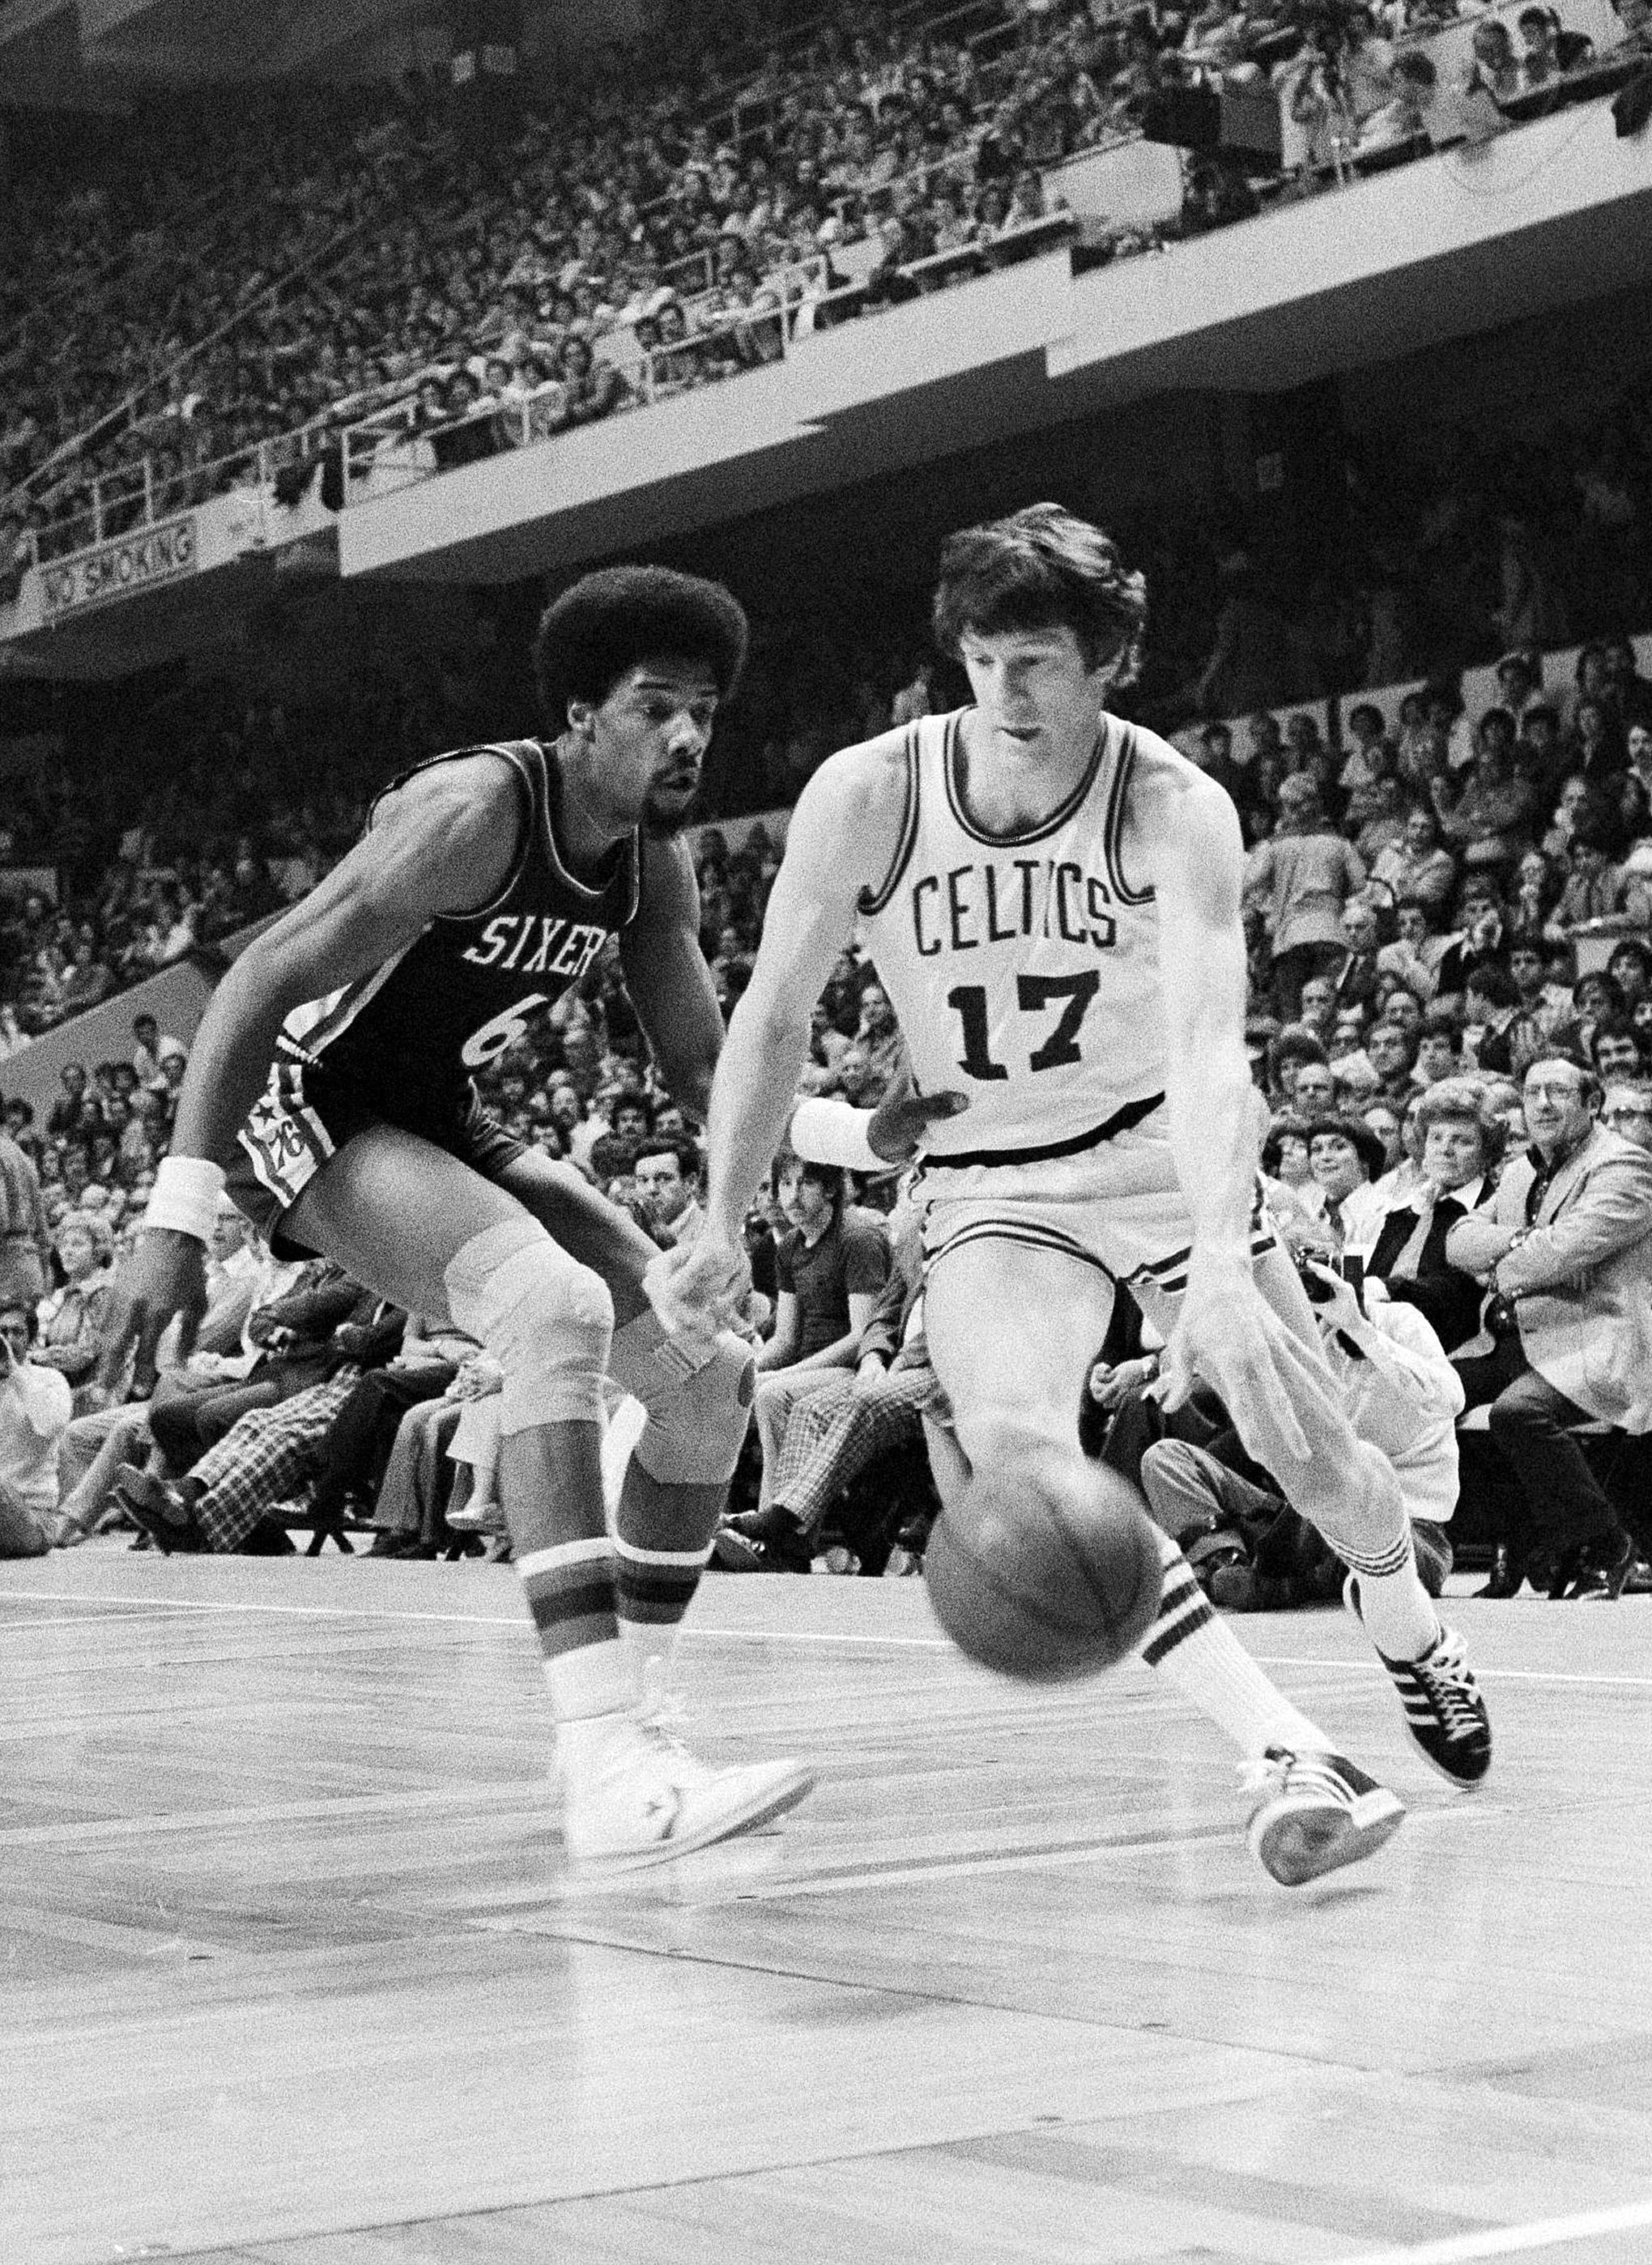 This Date in NBA History (April 15): John Havlicek records one of the